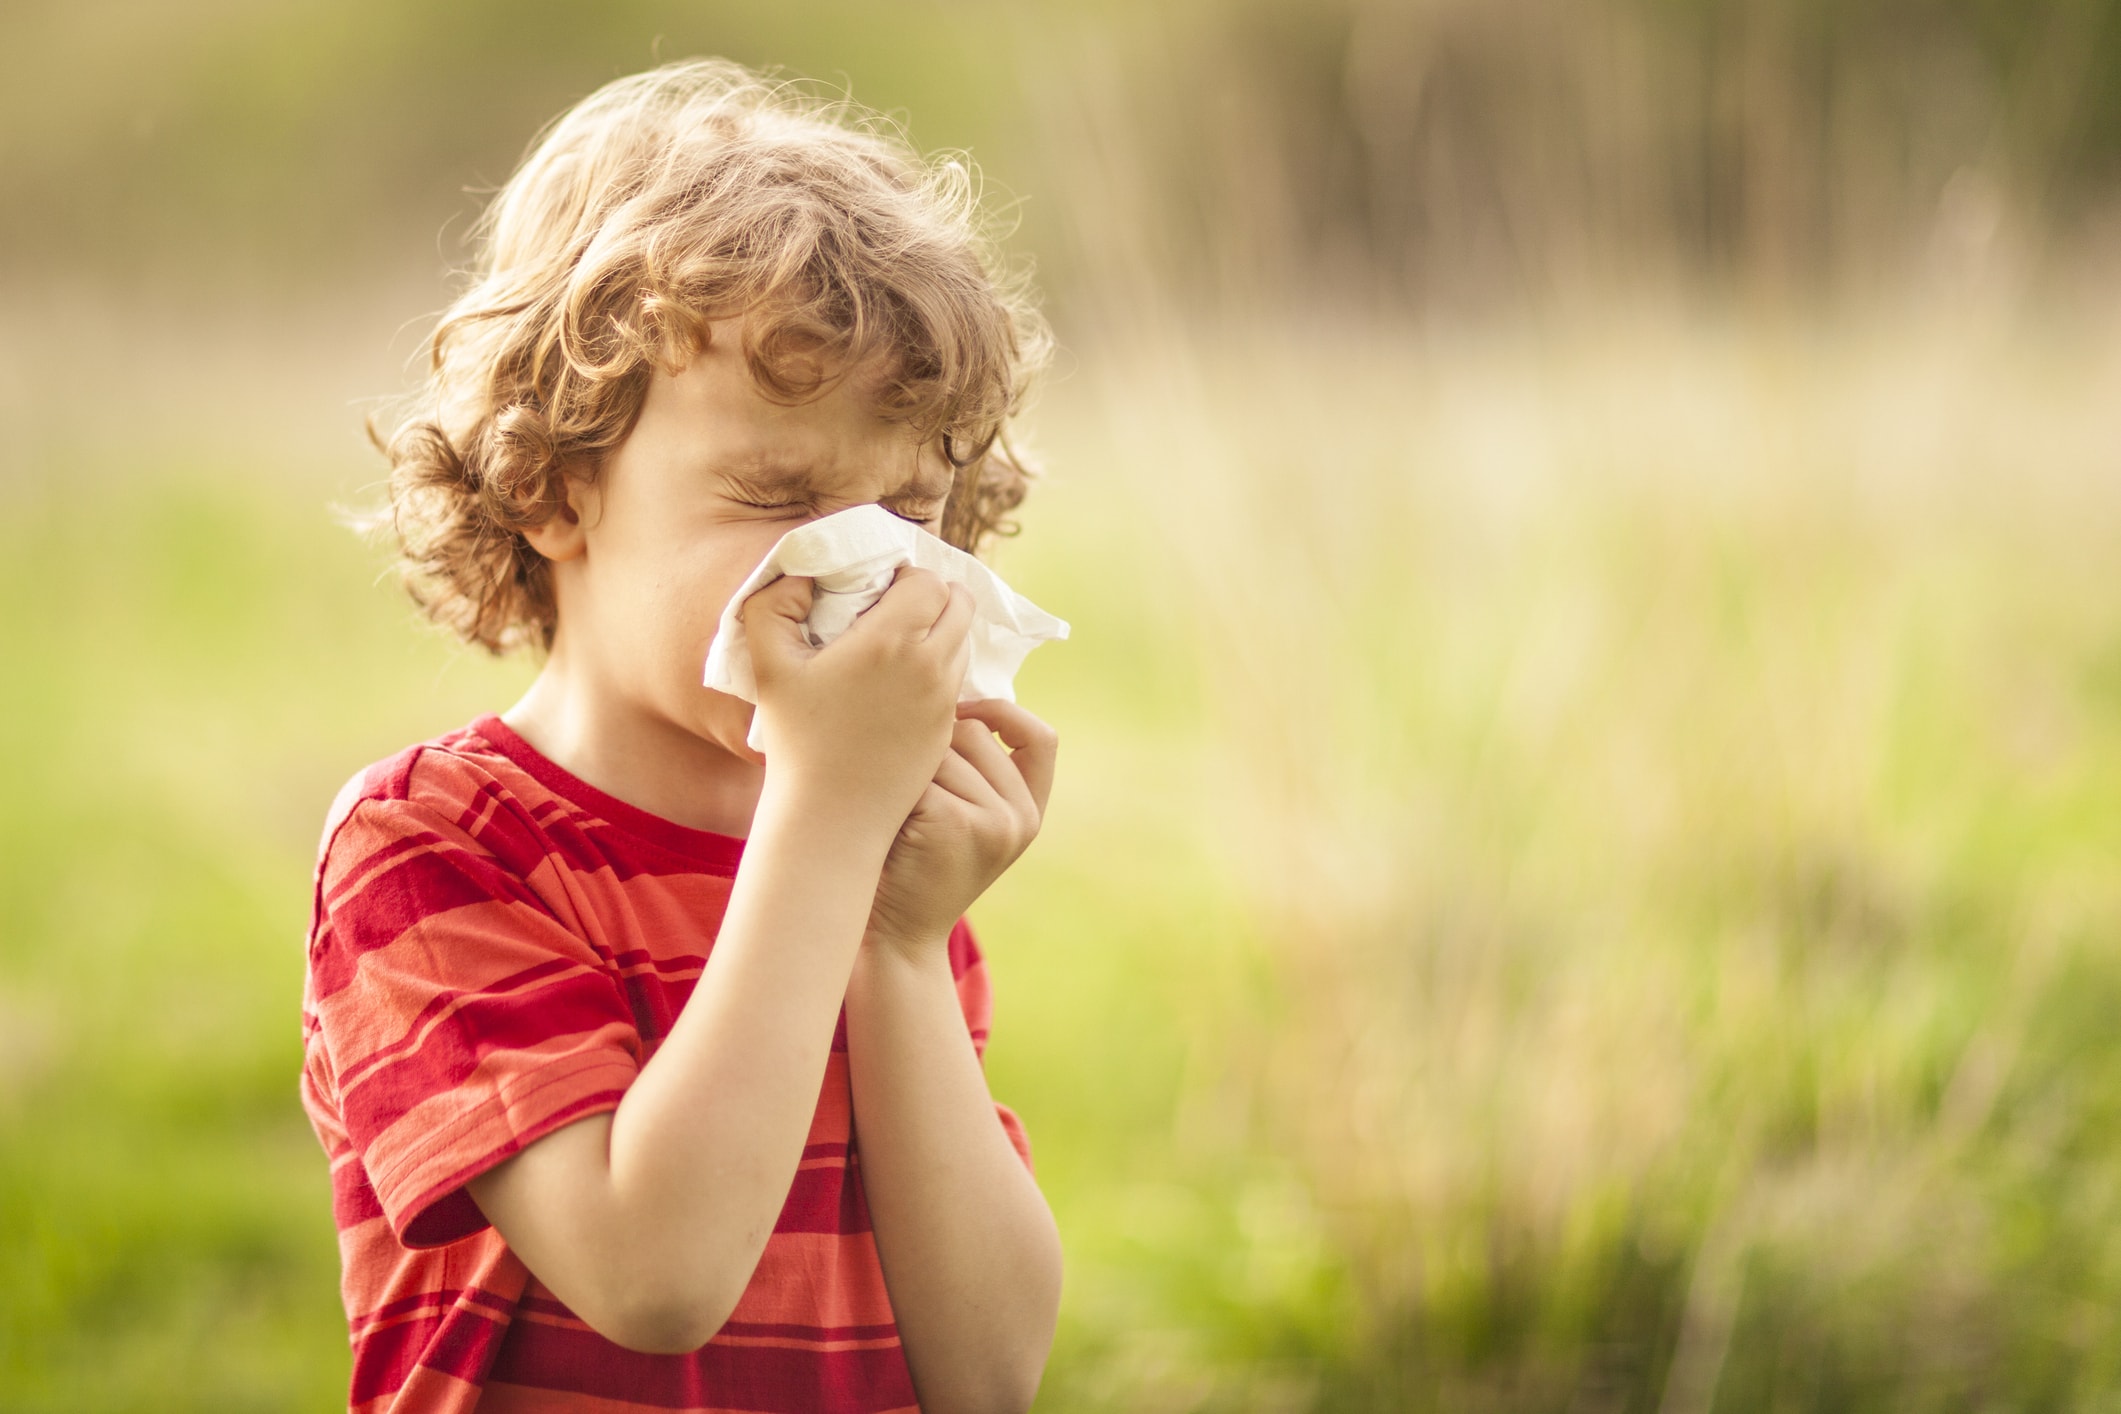 If you get hay fever  during spring you are at risk from thunderstorm asthma.